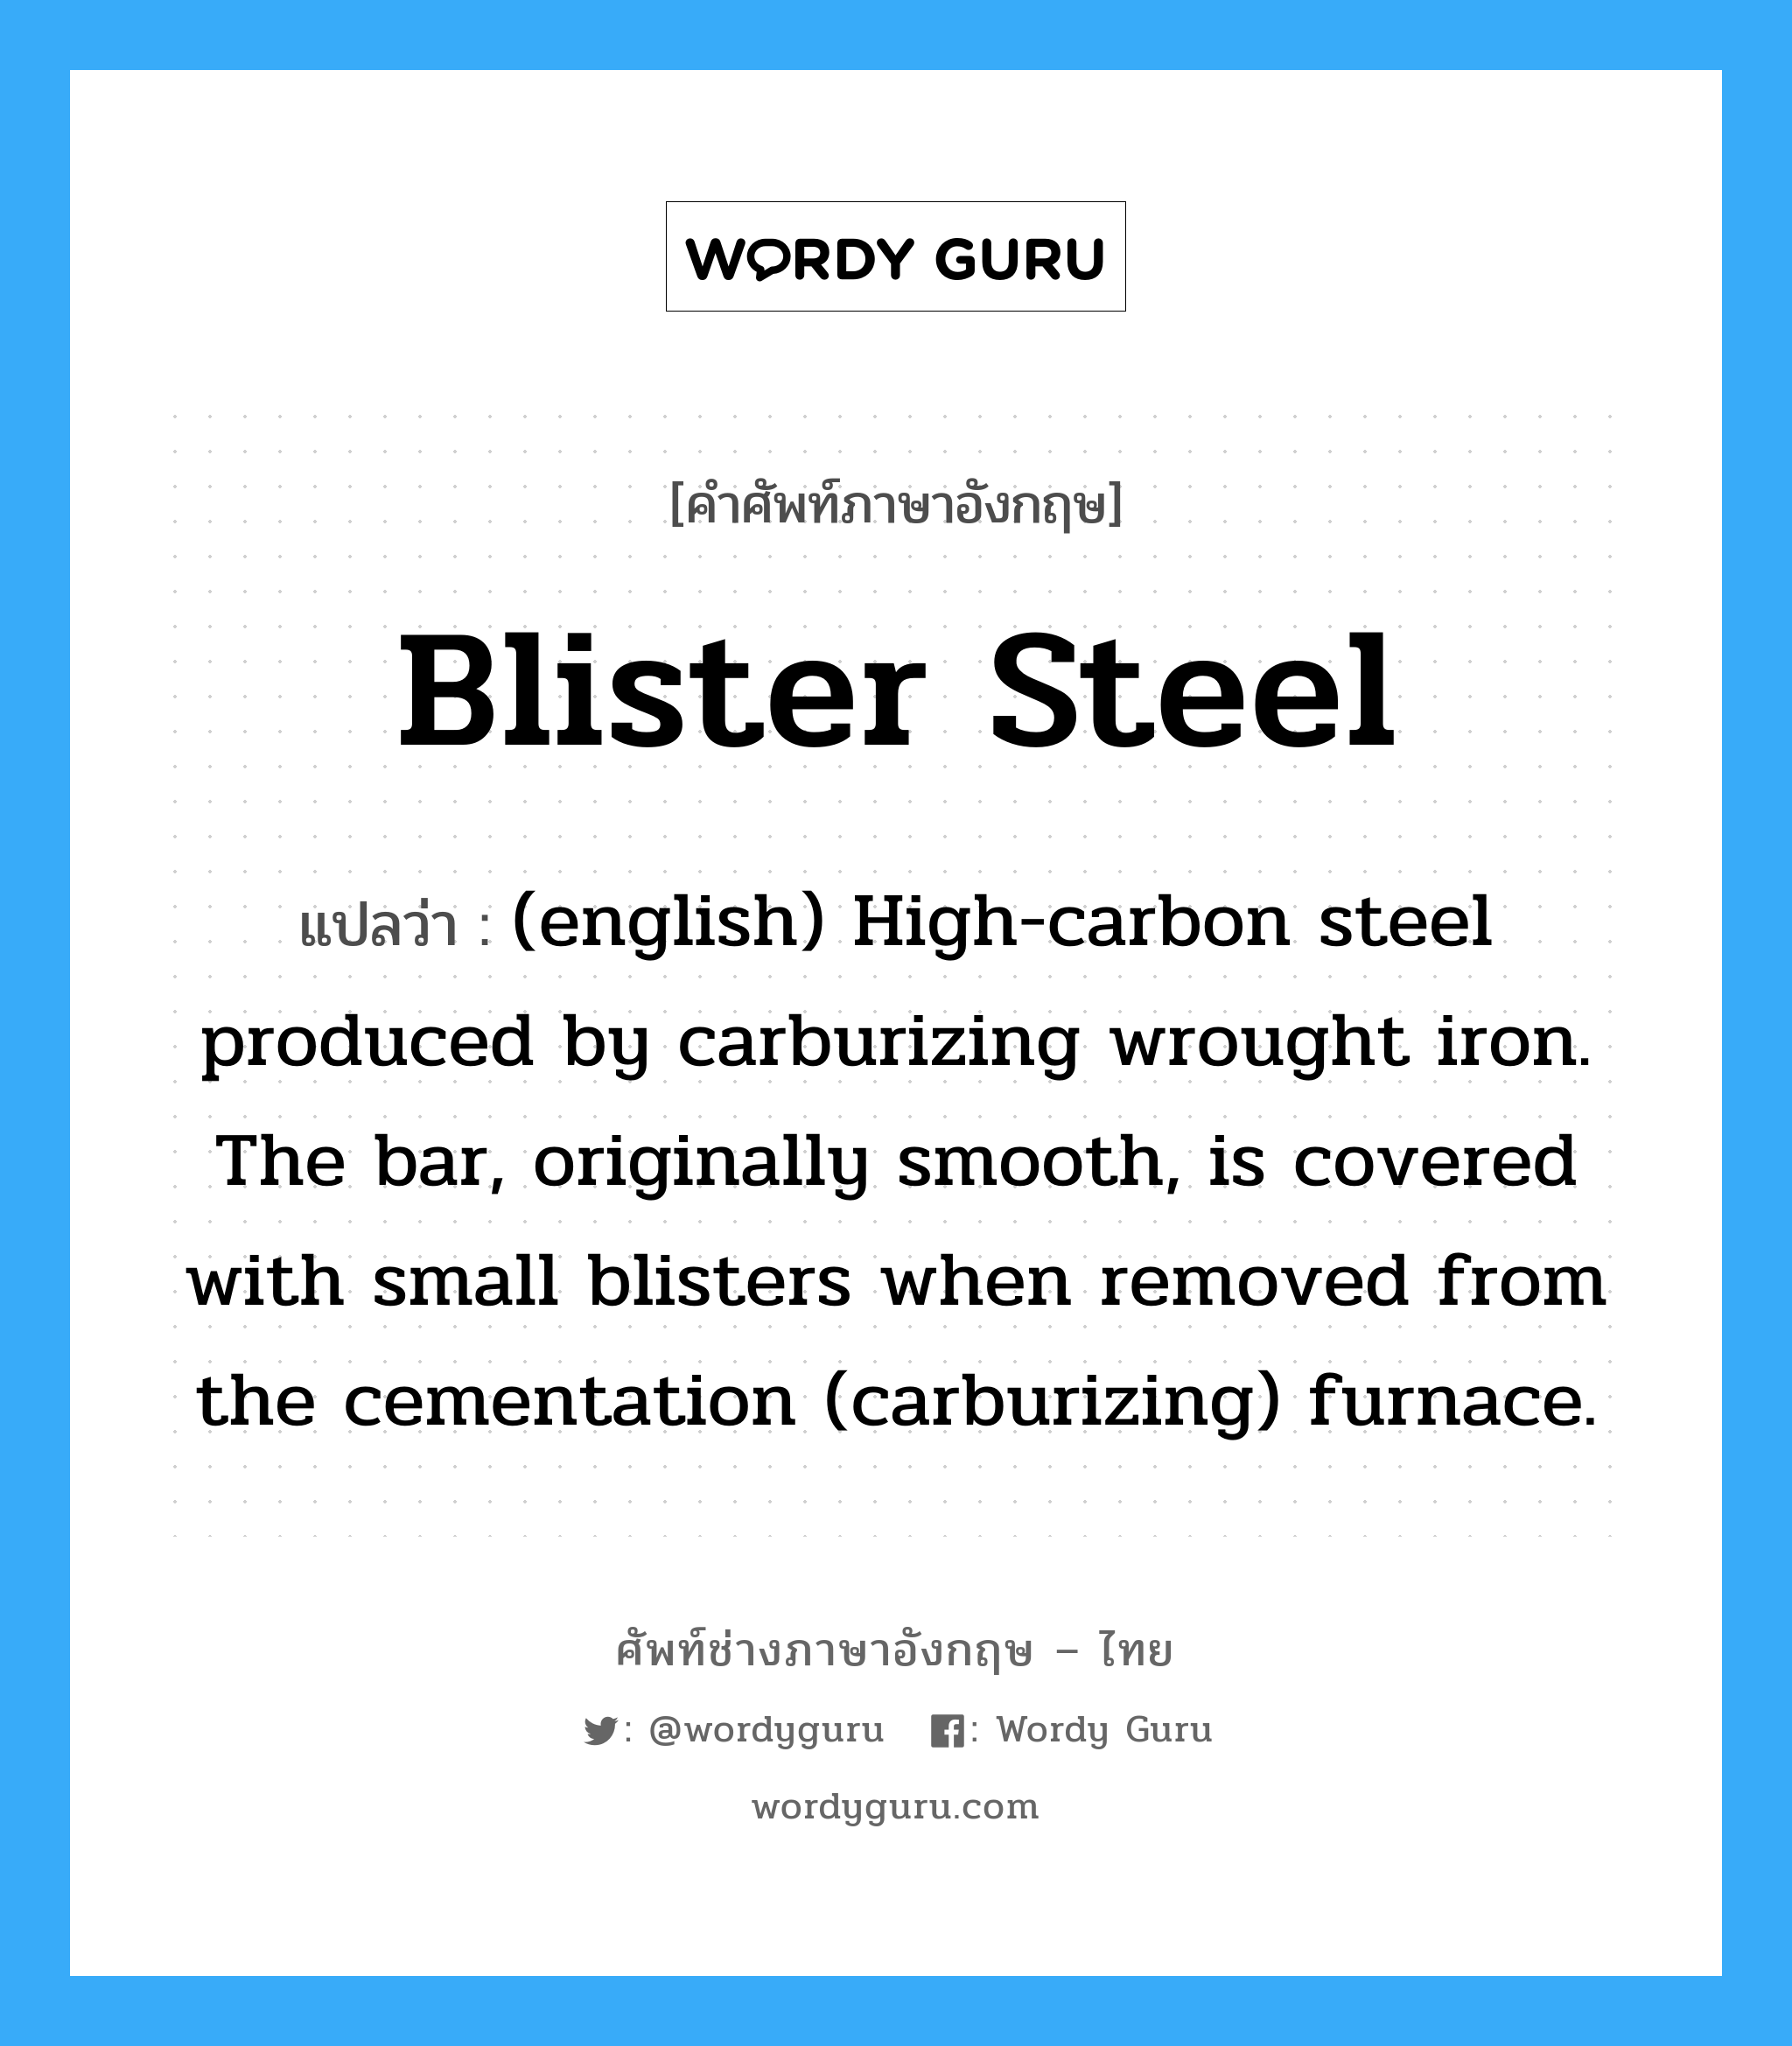 Blister Steel แปลว่า?, คำศัพท์ช่างภาษาอังกฤษ - ไทย Blister Steel คำศัพท์ภาษาอังกฤษ Blister Steel แปลว่า (english) High-carbon steel produced by carburizing wrought iron. The bar, originally smooth, is covered with small blisters when removed from the cementation (carburizing) furnace.